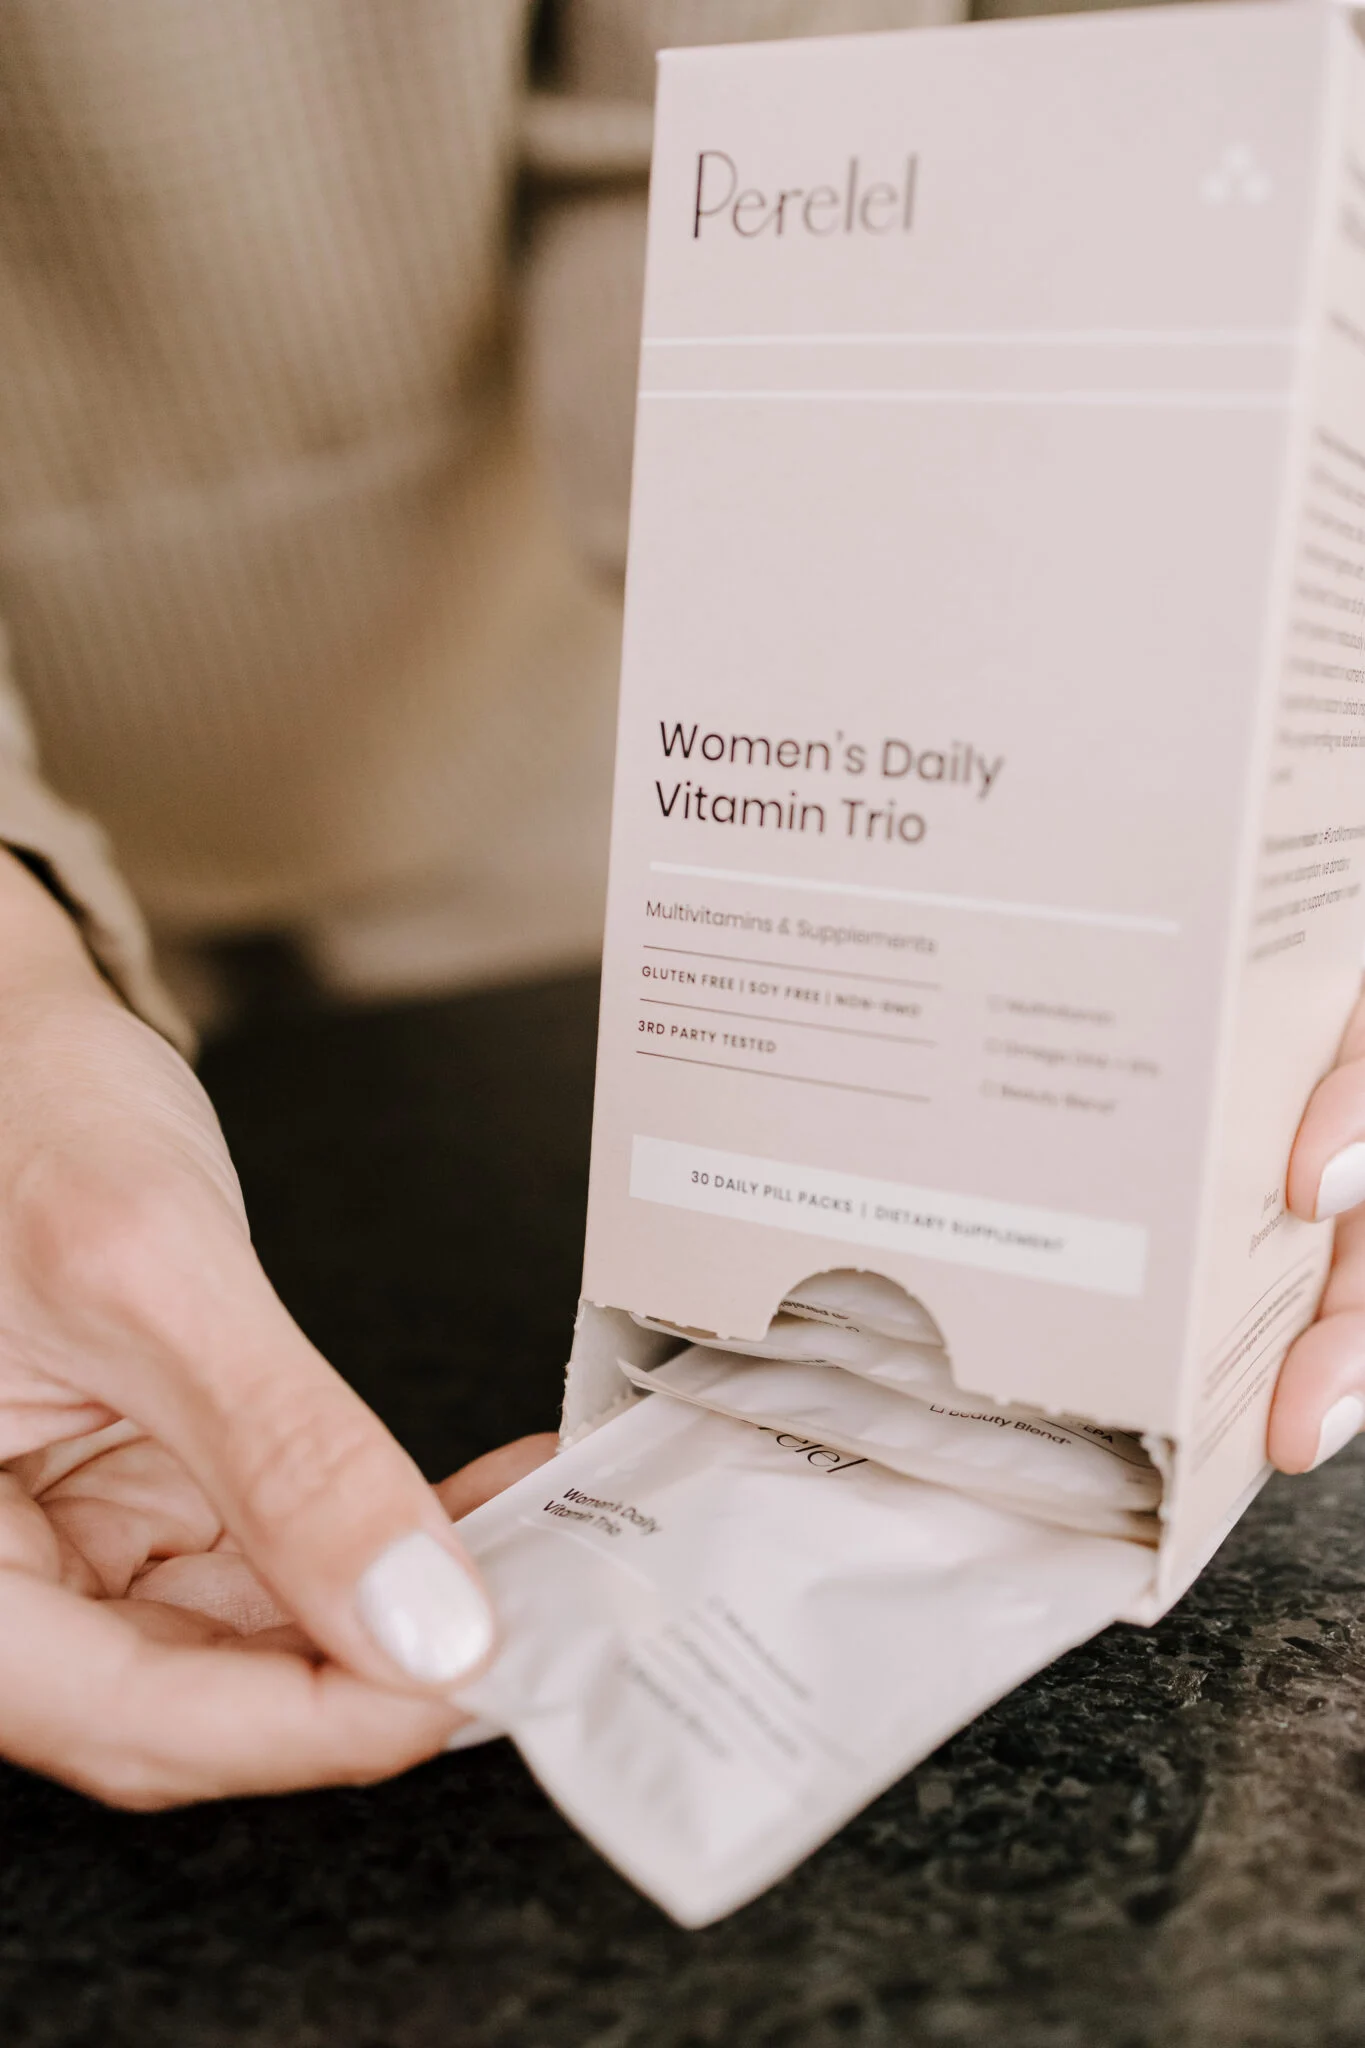 A woman holding up a Daily Vitamin Trio in packaging.